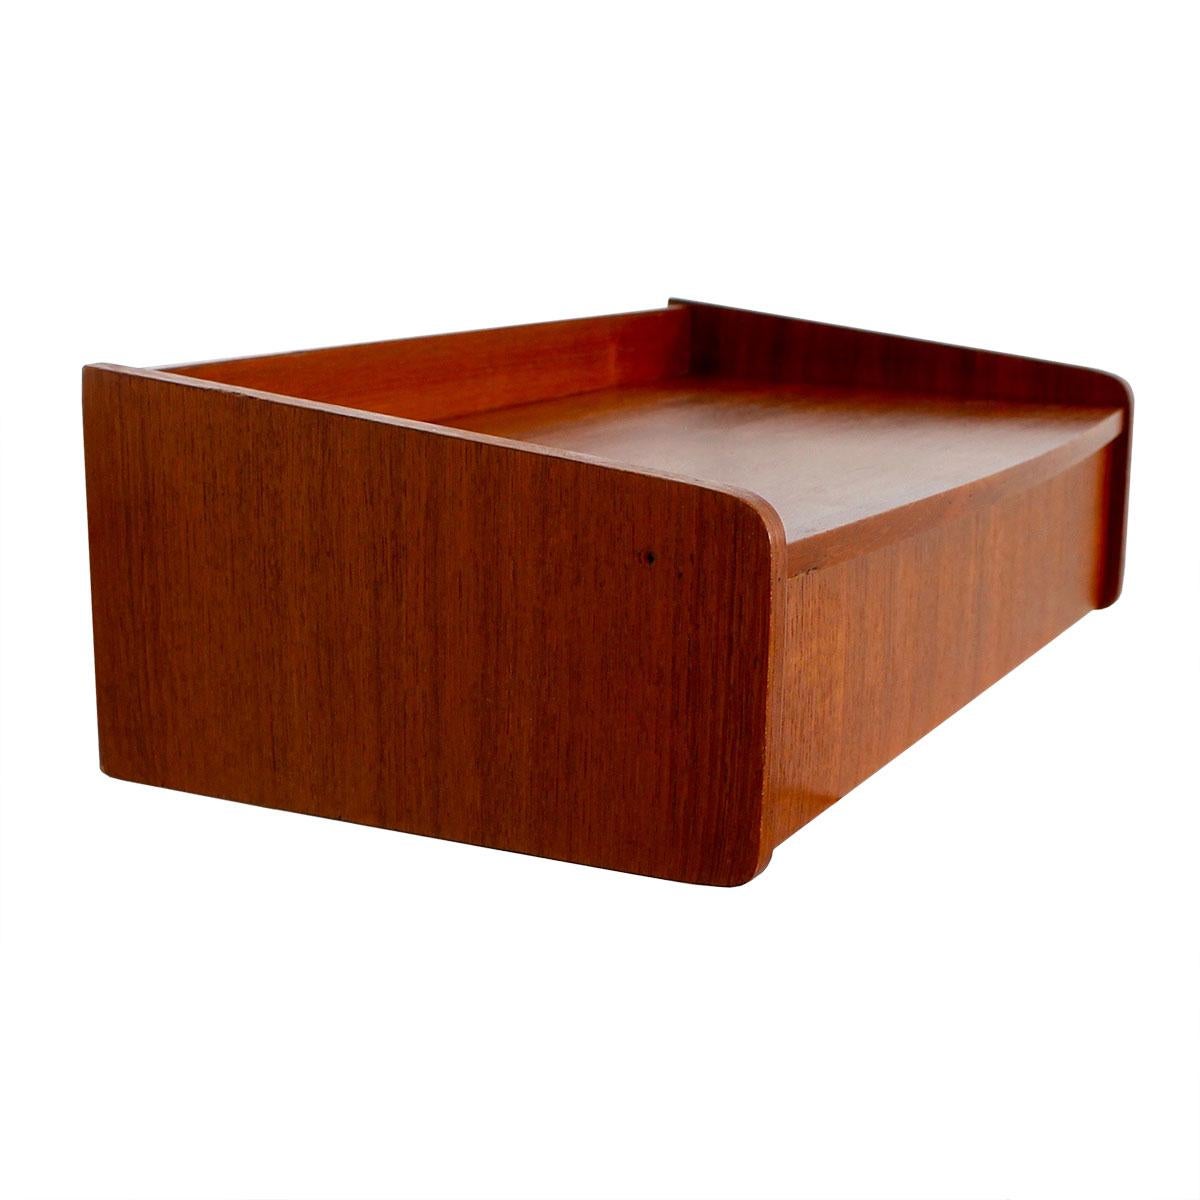 Danish Modern Teak Hanging Shelf with Drawer In Good Condition For Sale In Kensington, MD